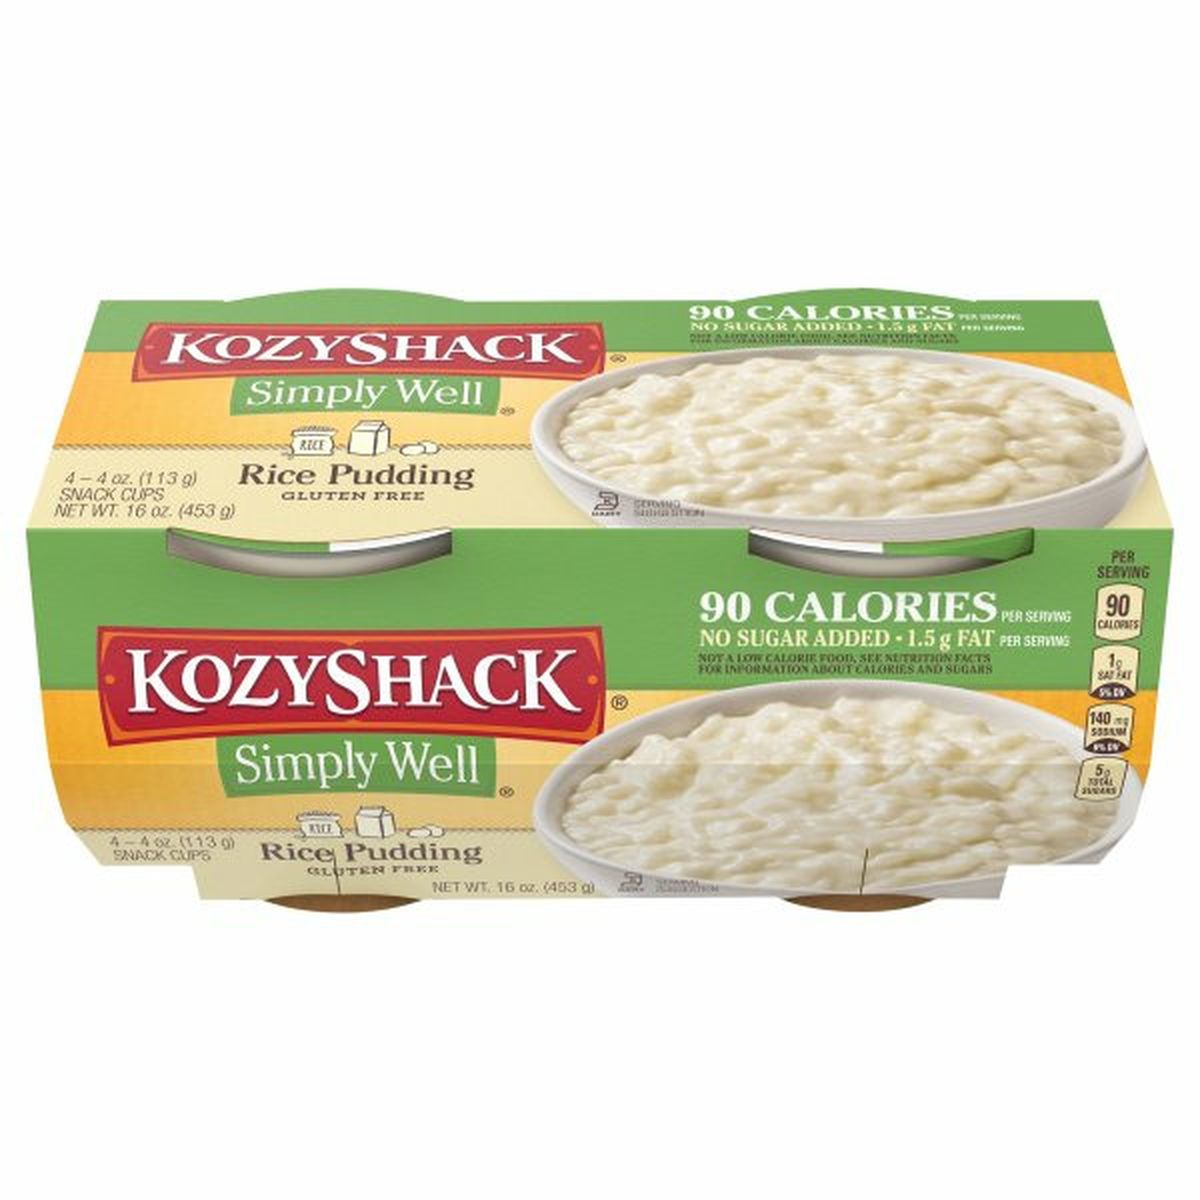 Calories in Kozy Shack Simply Well Rice Pudding, Gluten Free